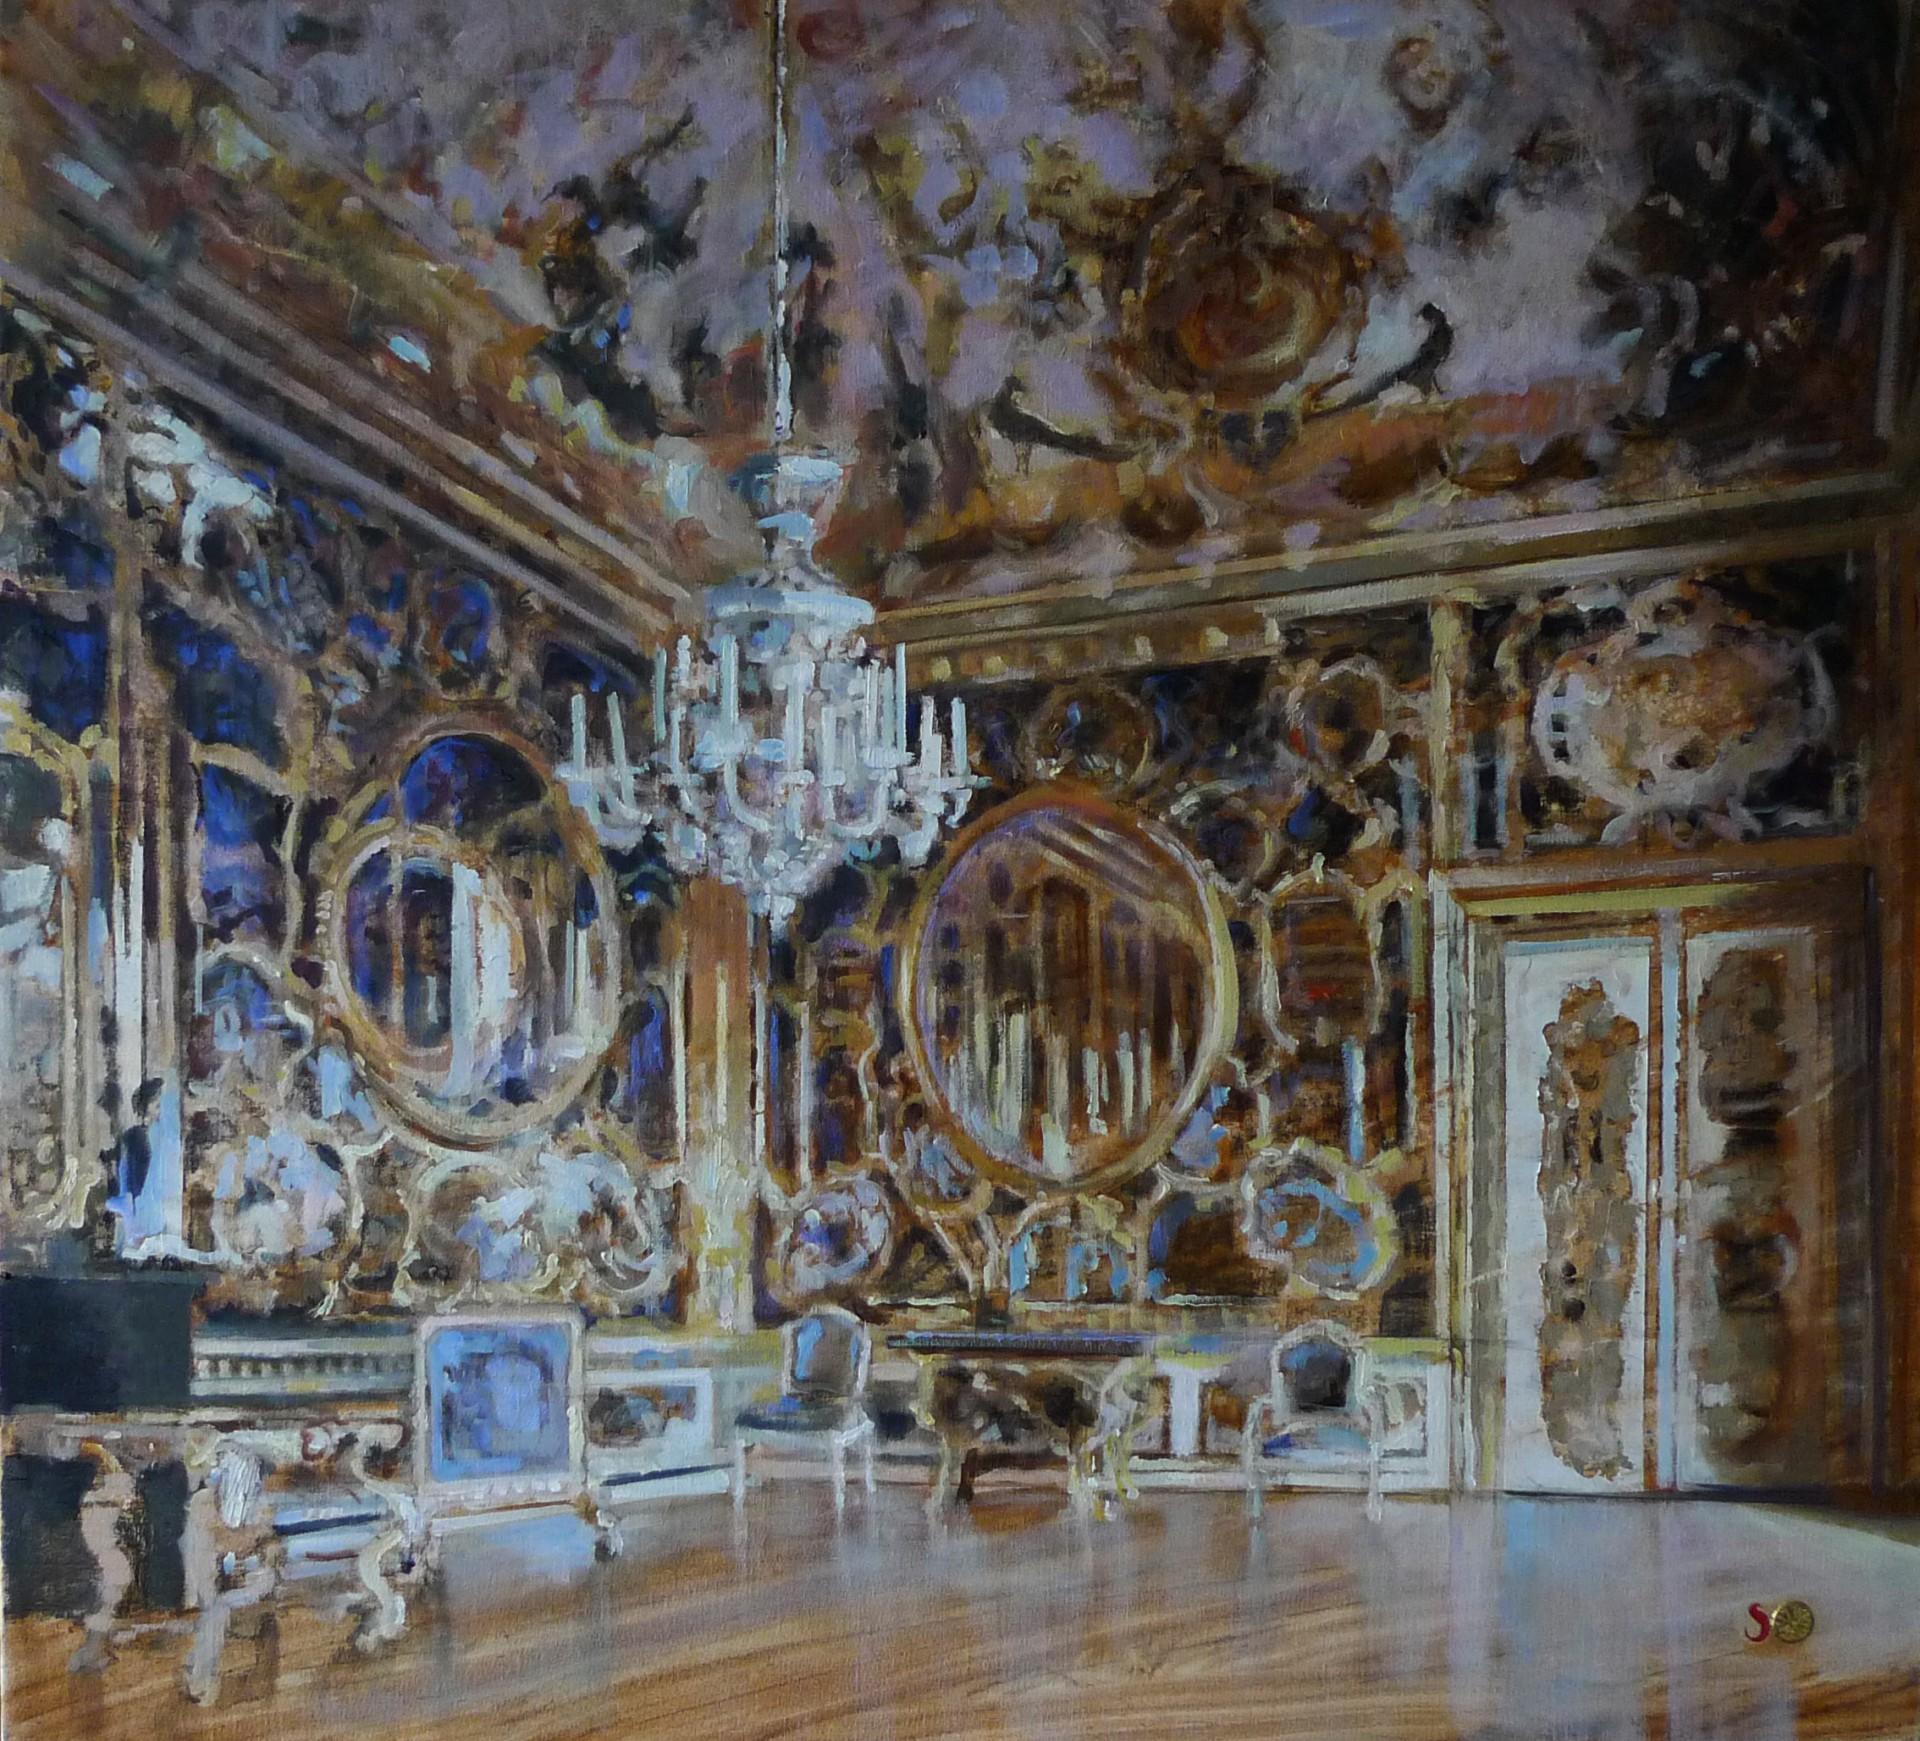 Sylvia Van Opstall Figurative Painting - Mirror Room- 21st Century Contemporary Oil Painting of a Palace interior